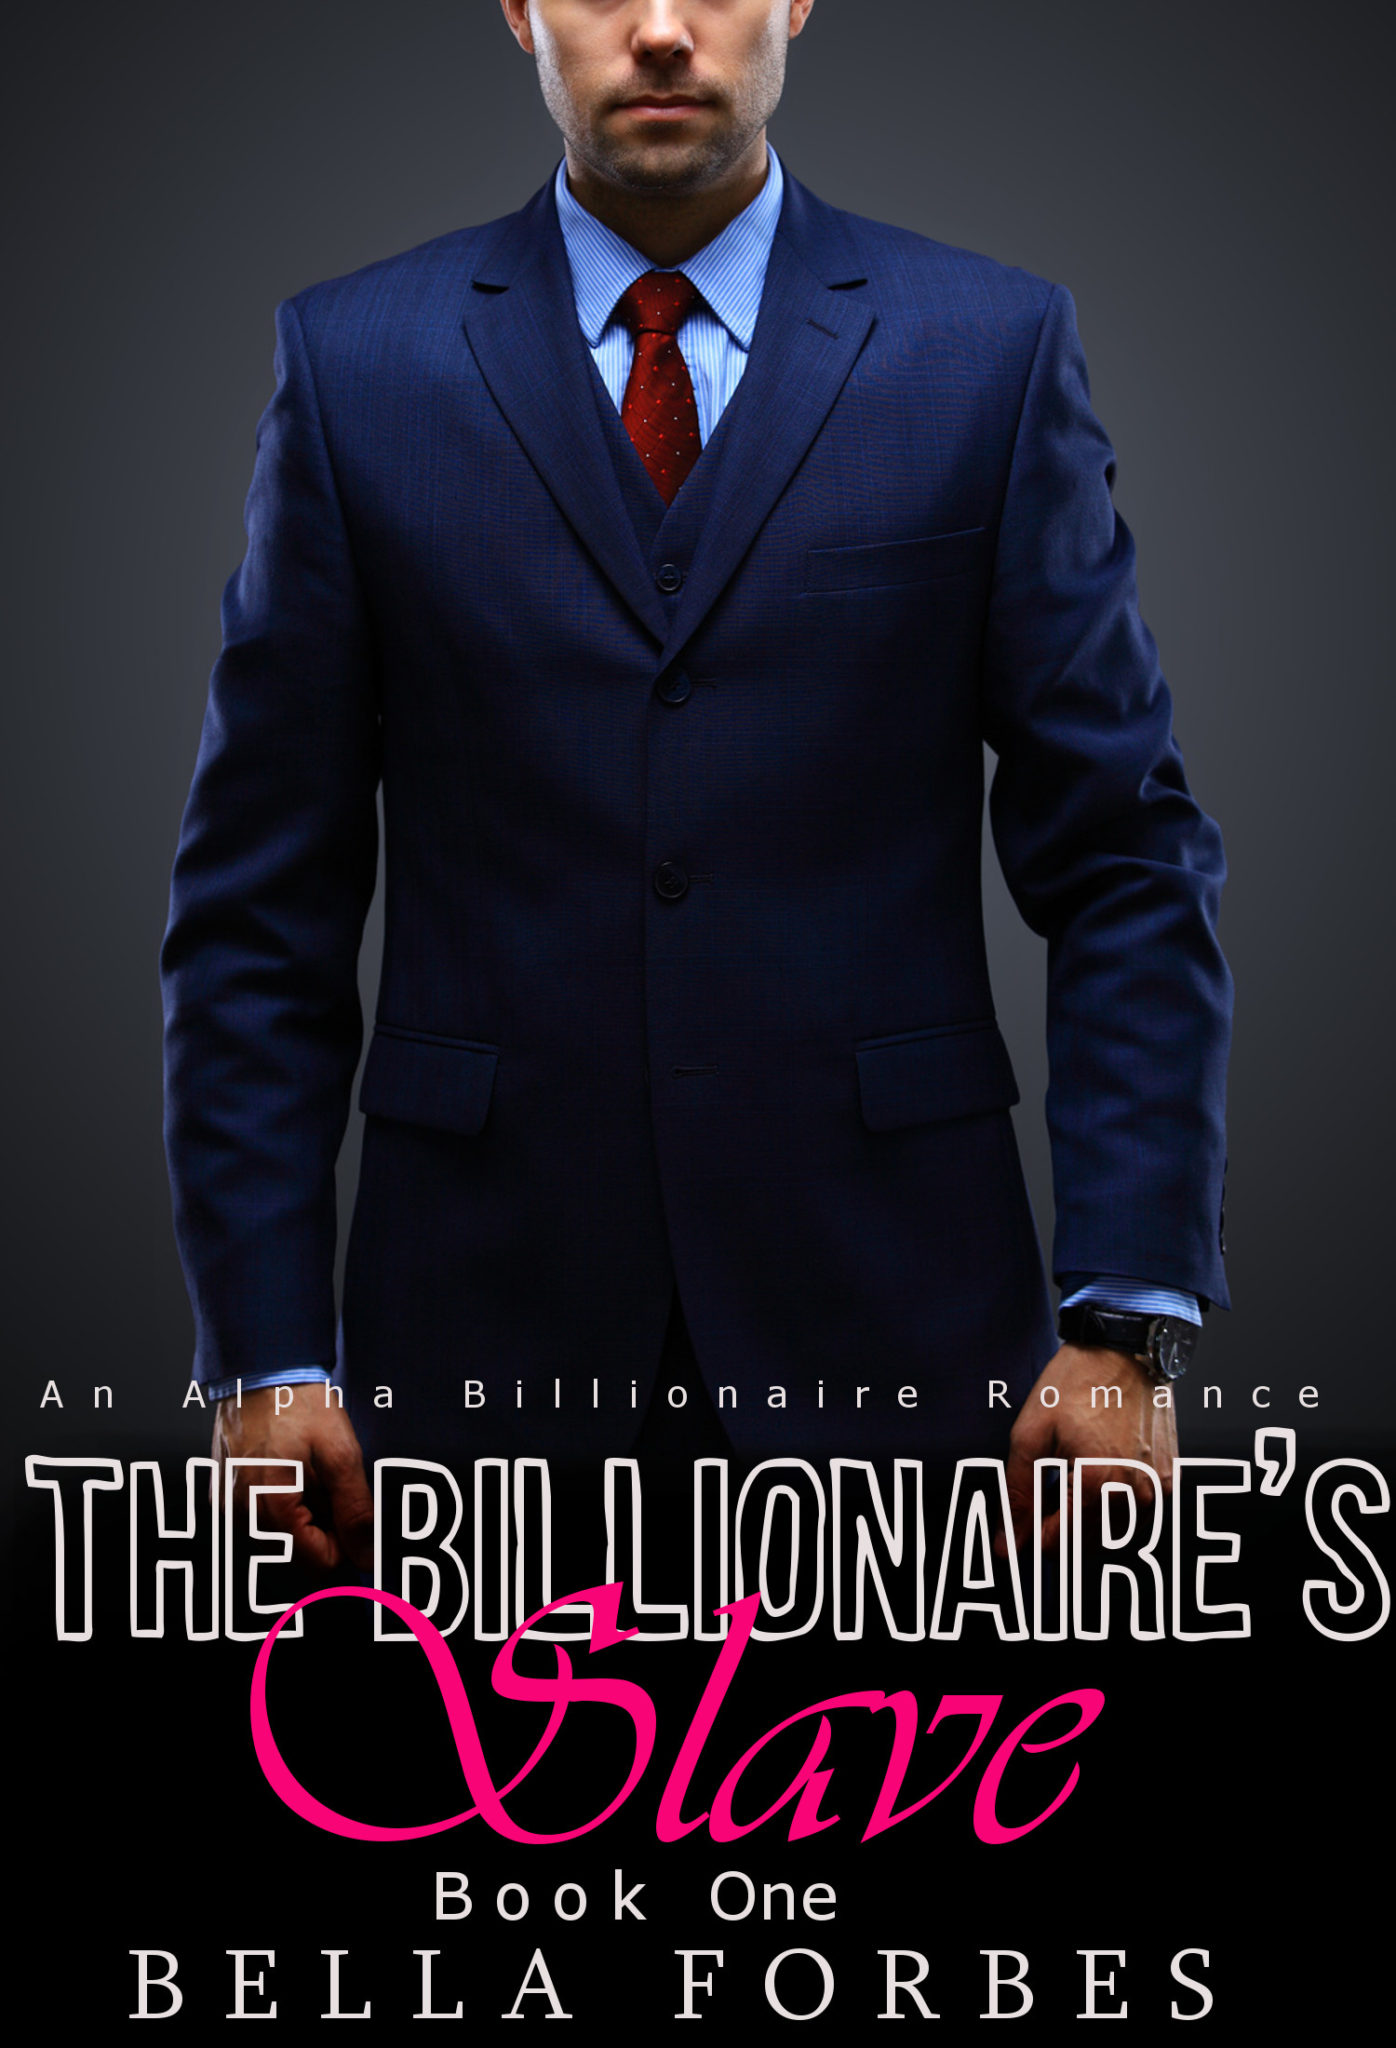 FREE: The Billionaire’s Slave: An Alpha Billionaire Romance (Book One) by Bella Forbes